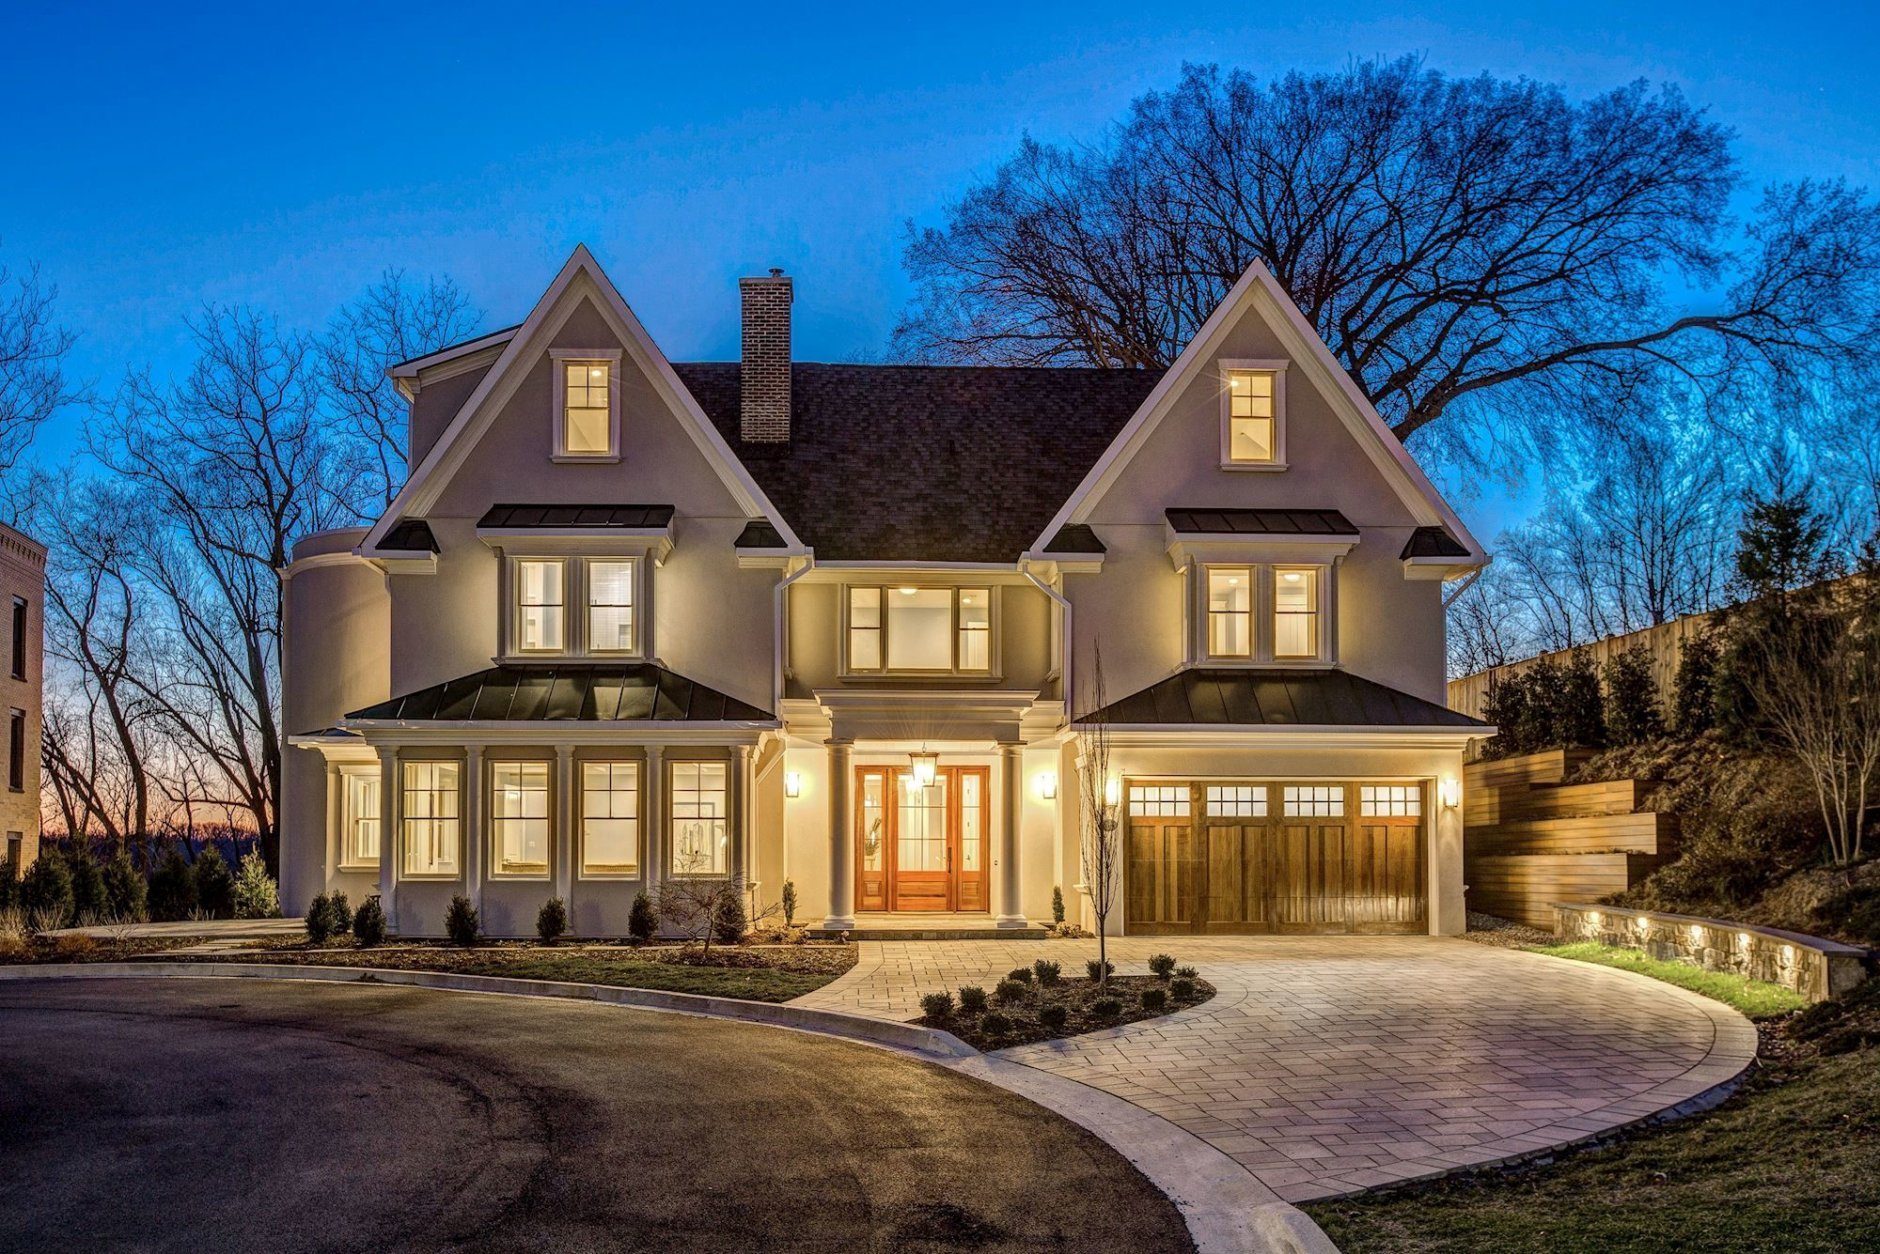 Howard K. Smith's 7,500-foot Bethesda home is on the market for $3.3 million. (Courtesy Cesar A Olivares for Wydler Brothers)